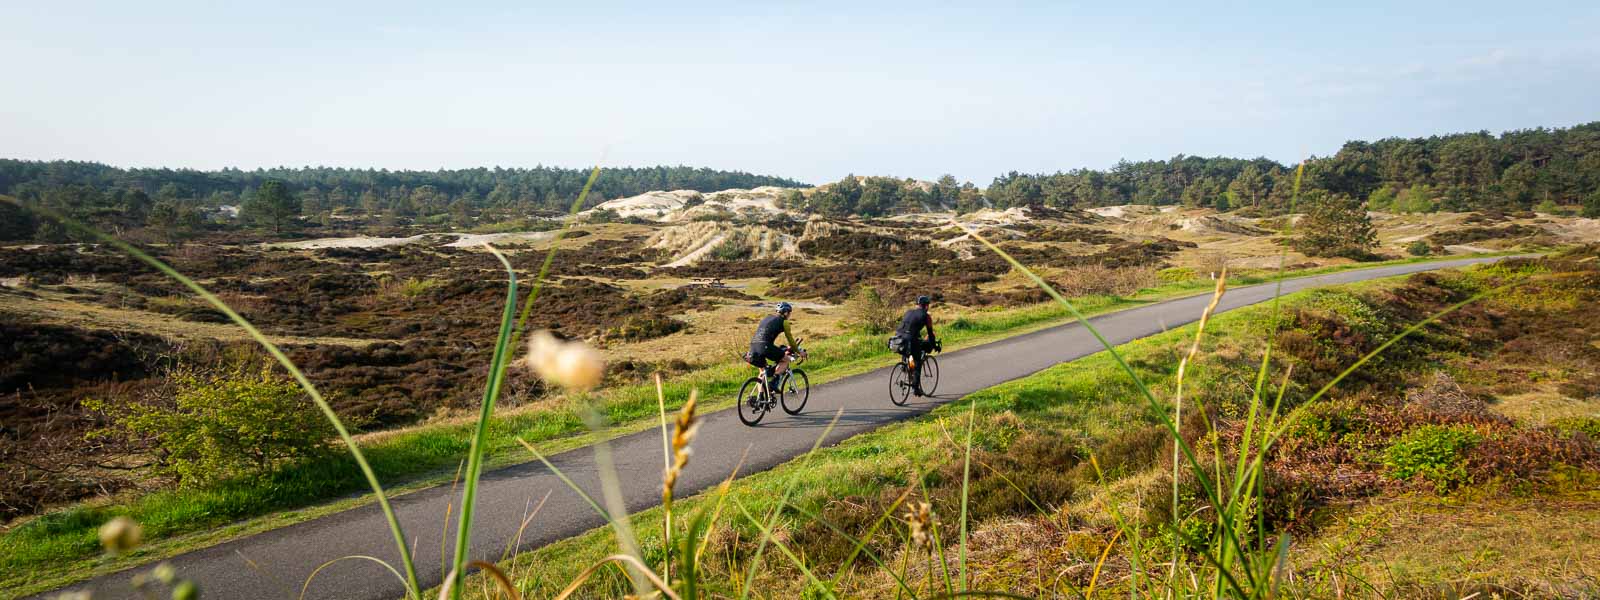 Two cyclists taking part in the Race around the Netherlands ride on a road through dunes.